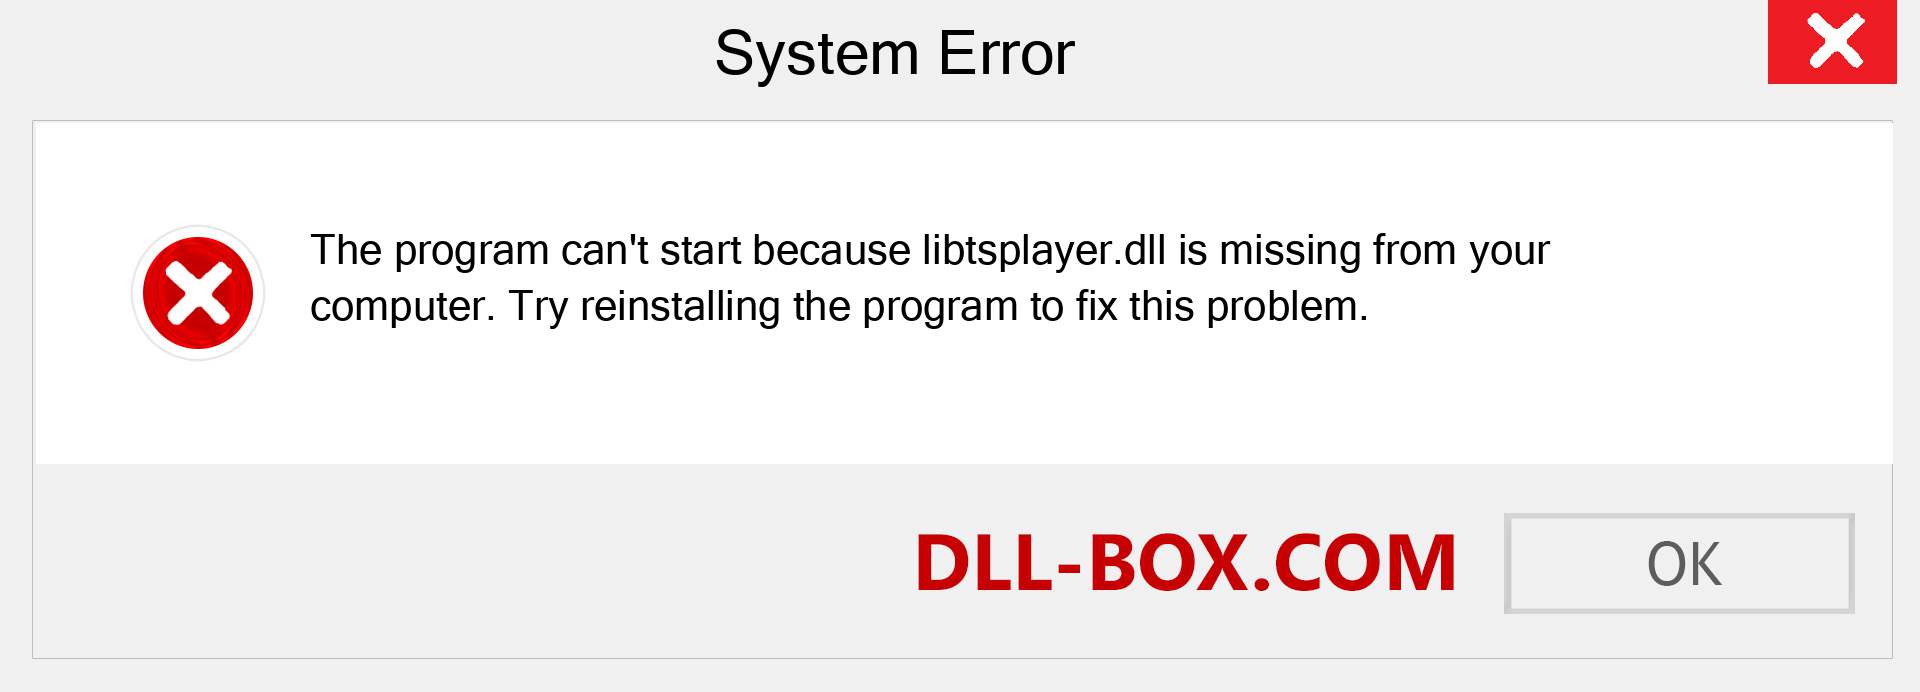  libtsplayer.dll file is missing?. Download for Windows 7, 8, 10 - Fix  libtsplayer dll Missing Error on Windows, photos, images